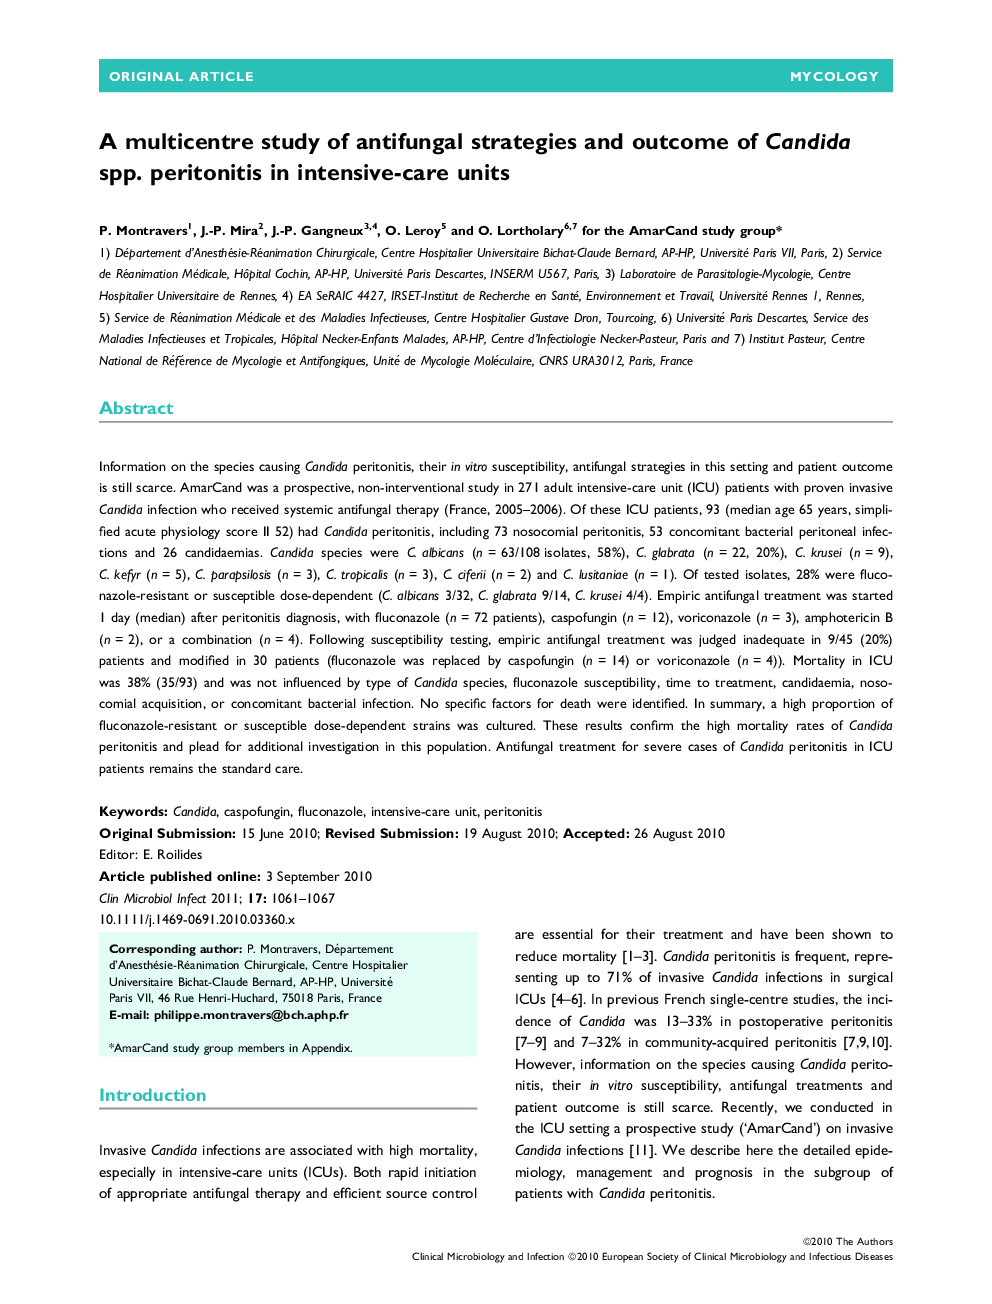 A multicentre study of antifungal strategies and outcome of Candida spp. peritonitis in intensive-care units 